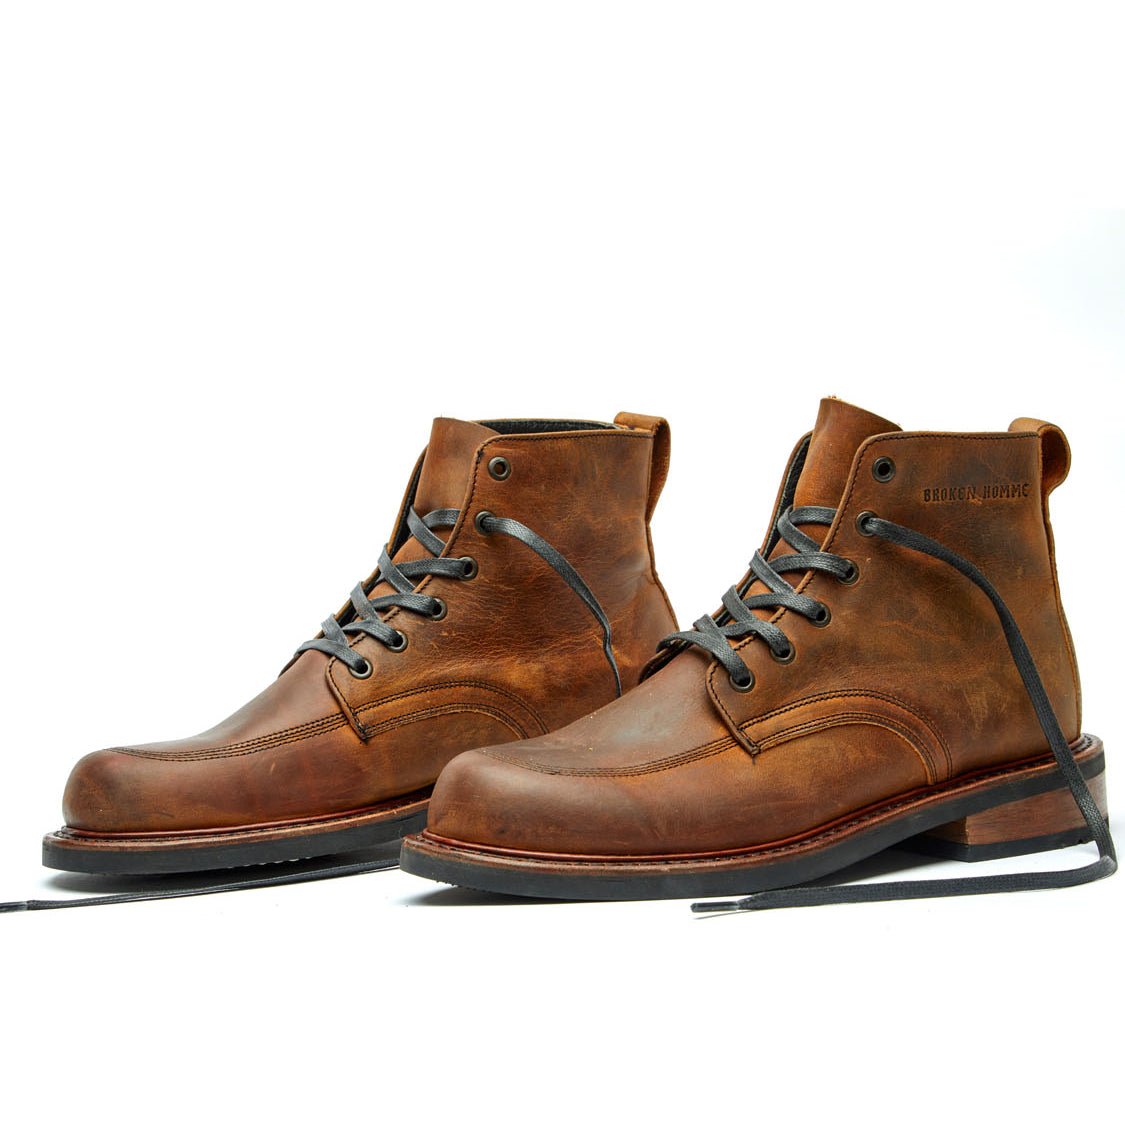 A pair of Davis II brown leather work boots by Broken Homme on a white background.